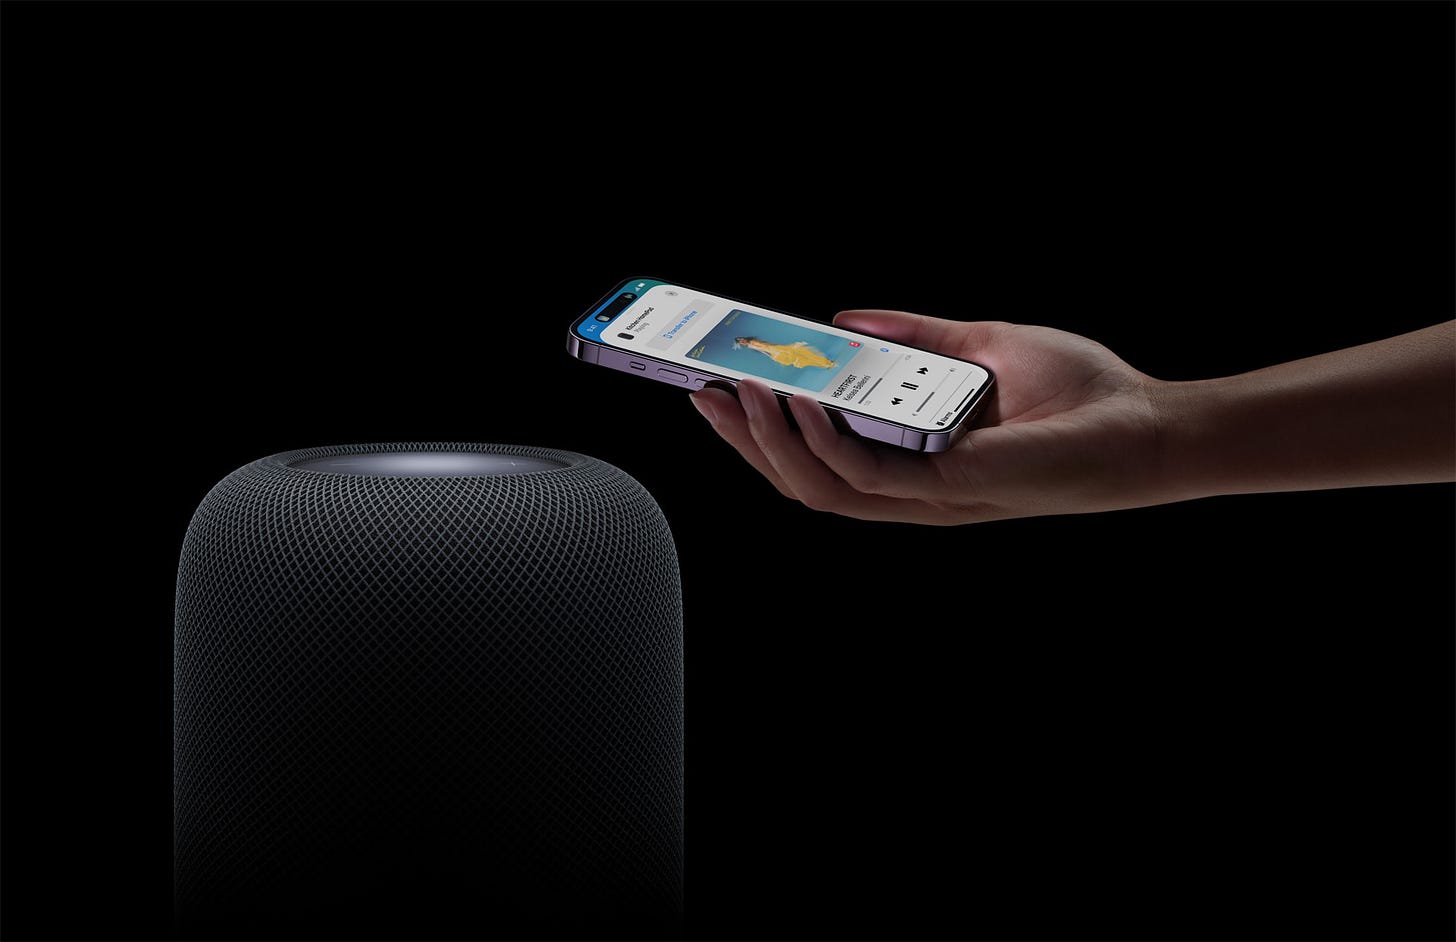 The new HomePod in black linking up with an iPhone 13 Pro to share music.